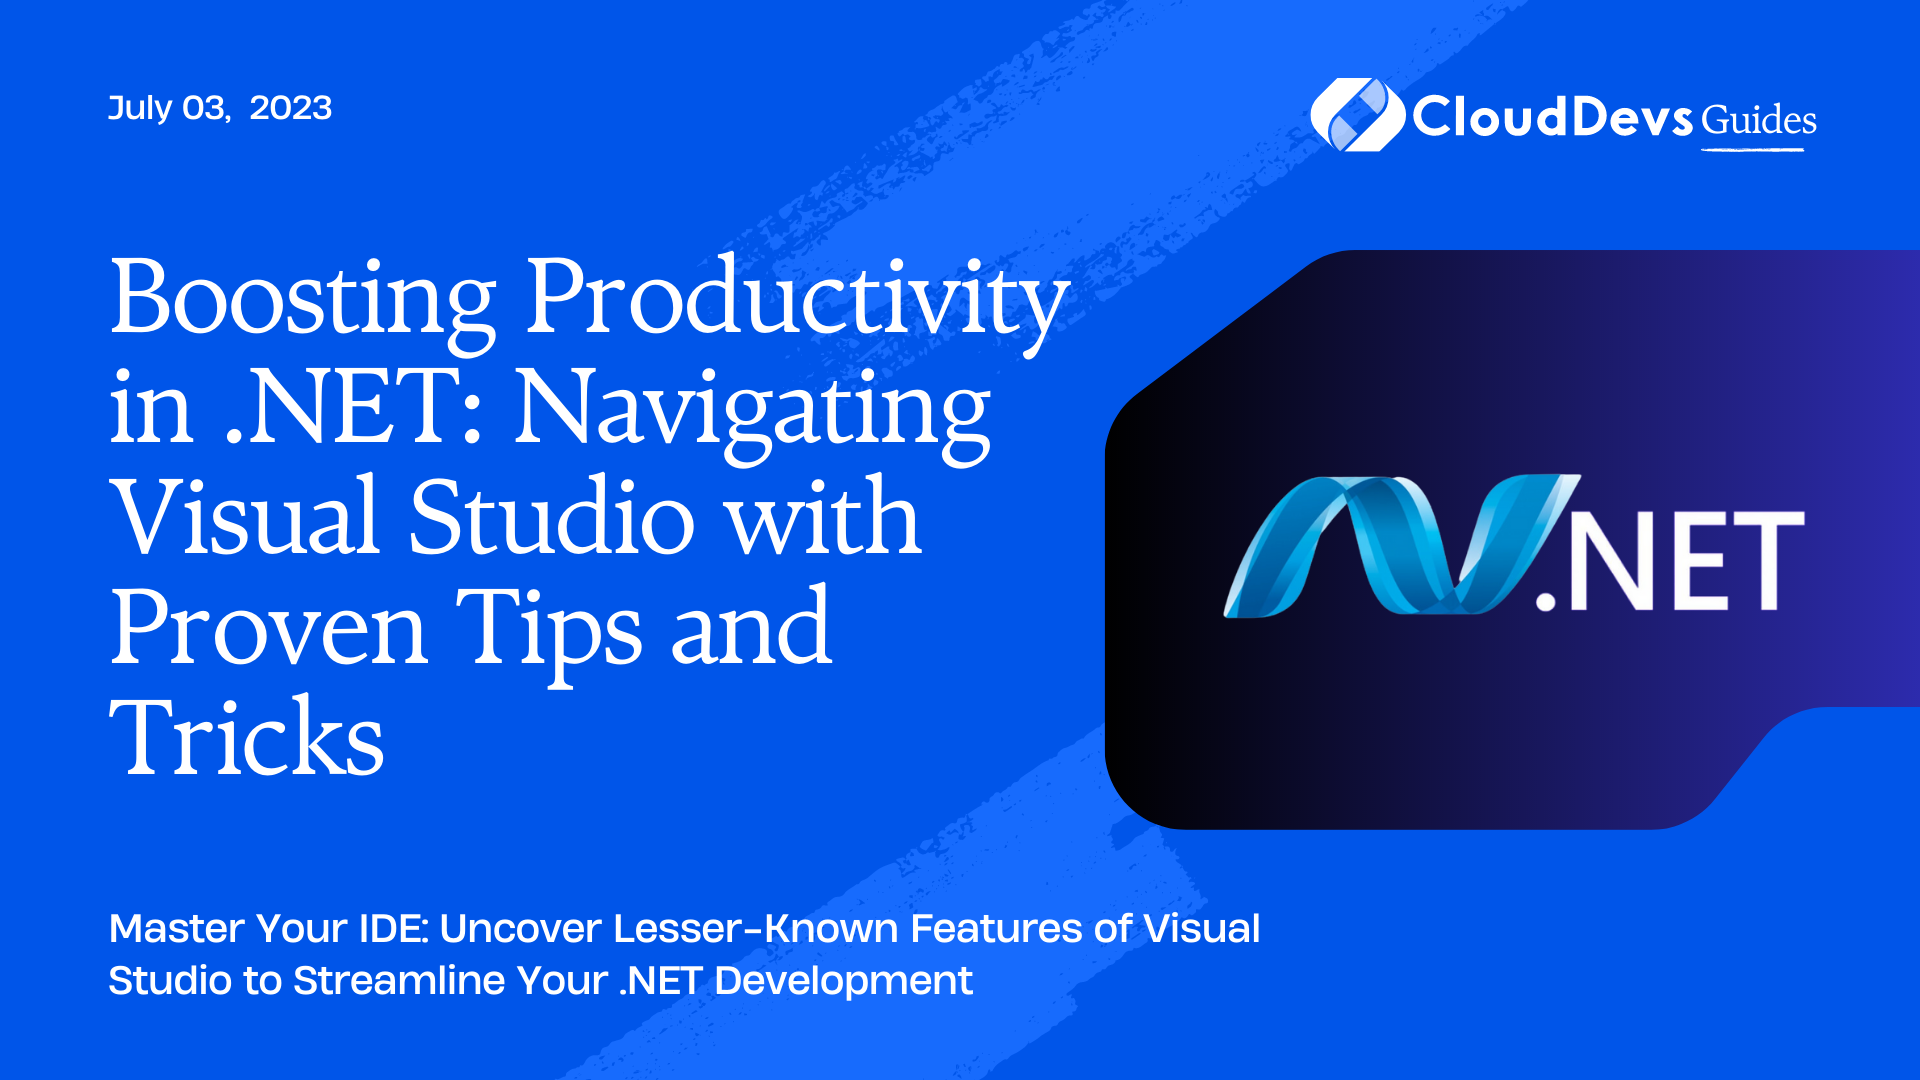 Boosting Productivity in .NET: Navigating Visual Studio with Proven Tips and Tricks